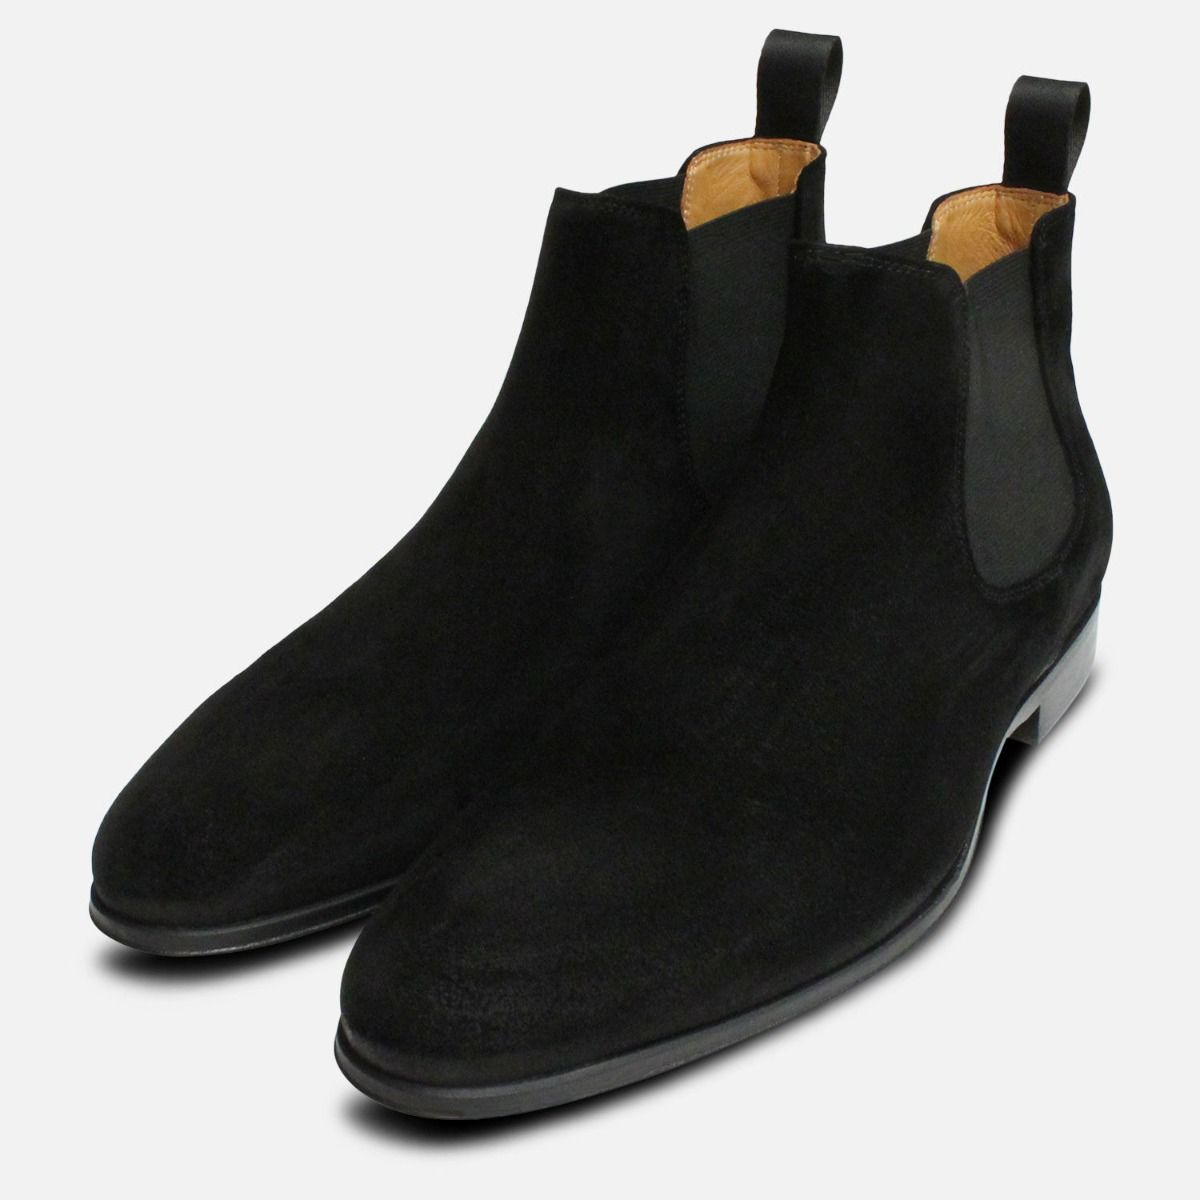 Beatle Boots in Black Suede for Men by Arthur Knight